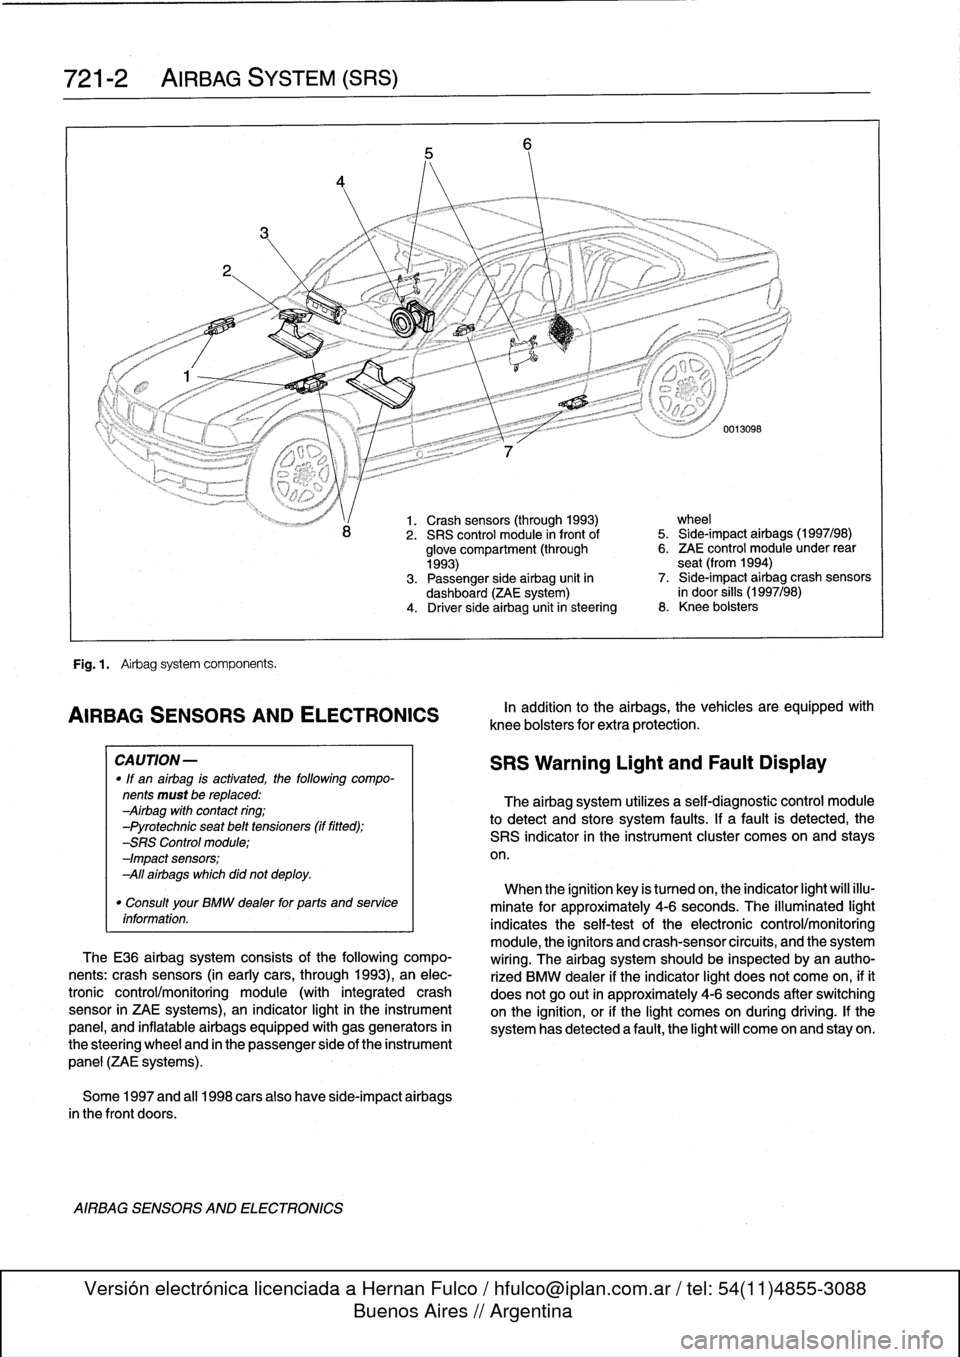 BMW 318i 1997 E36 Owners Guide 
721-2

	

AIRBAG
SYSTEM
(SRS)

Fig
.
1
.

	

Airbag
system
components
.

AIRBAG
SENSORSAND
ELECTRONICS

CA
UTION-

"
If
an
airbag
is
activated,
the
following
compo-
nents
must
be
replaced
:
Airbag
wi